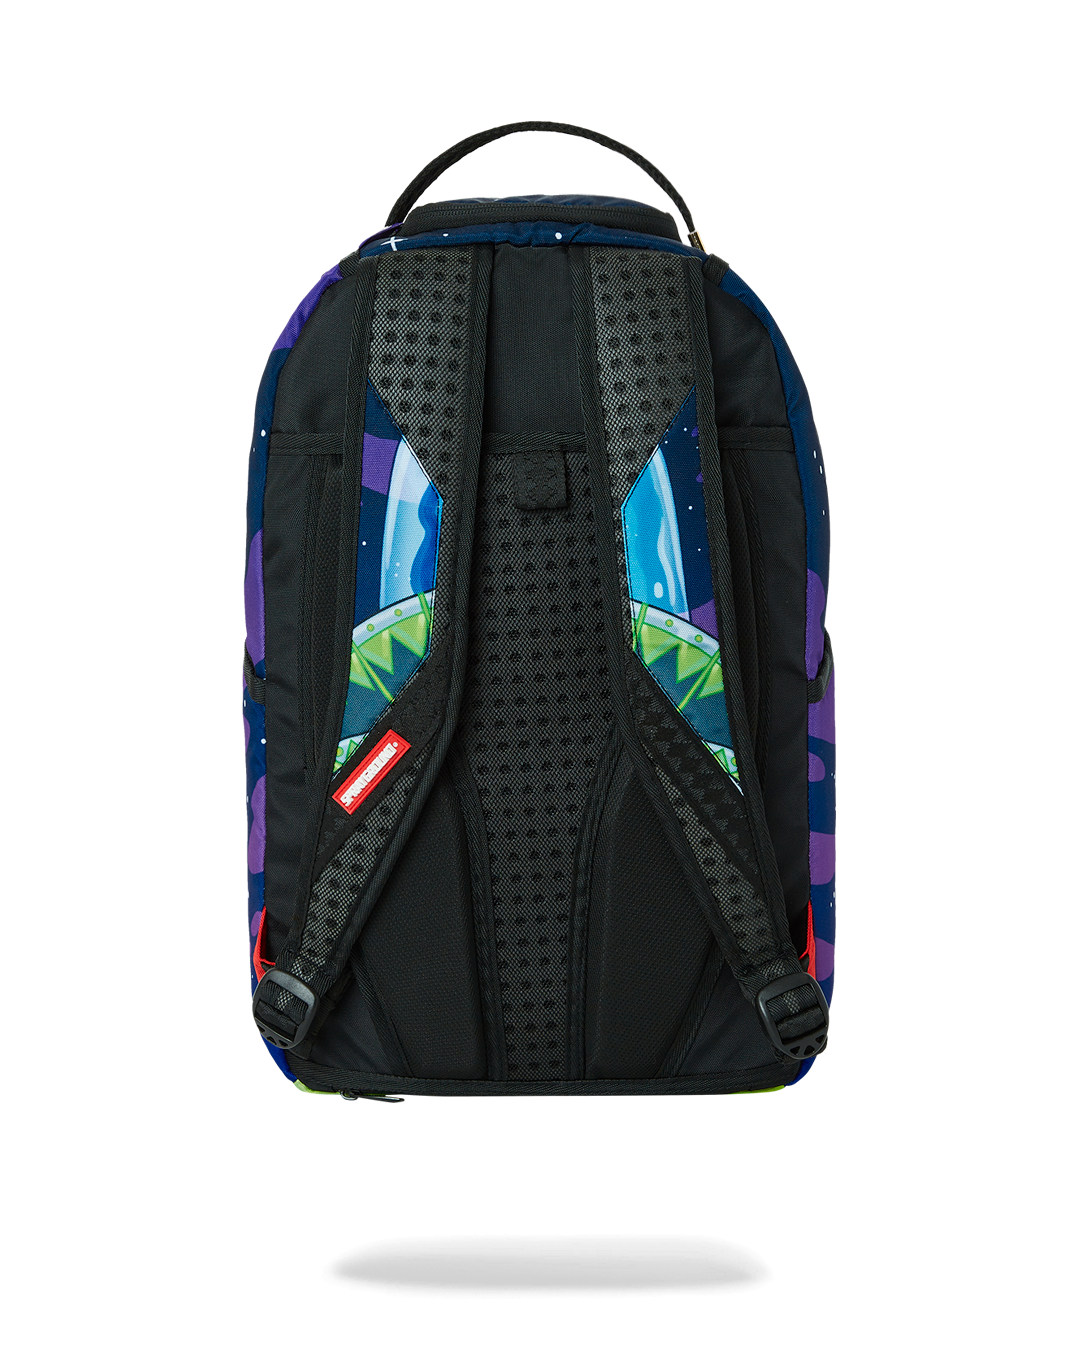 SPRAYGROUND® BACKPACK LOONEY TUNES MARVIN THE MARTIAN FEARLESS LEADER BACKPACK